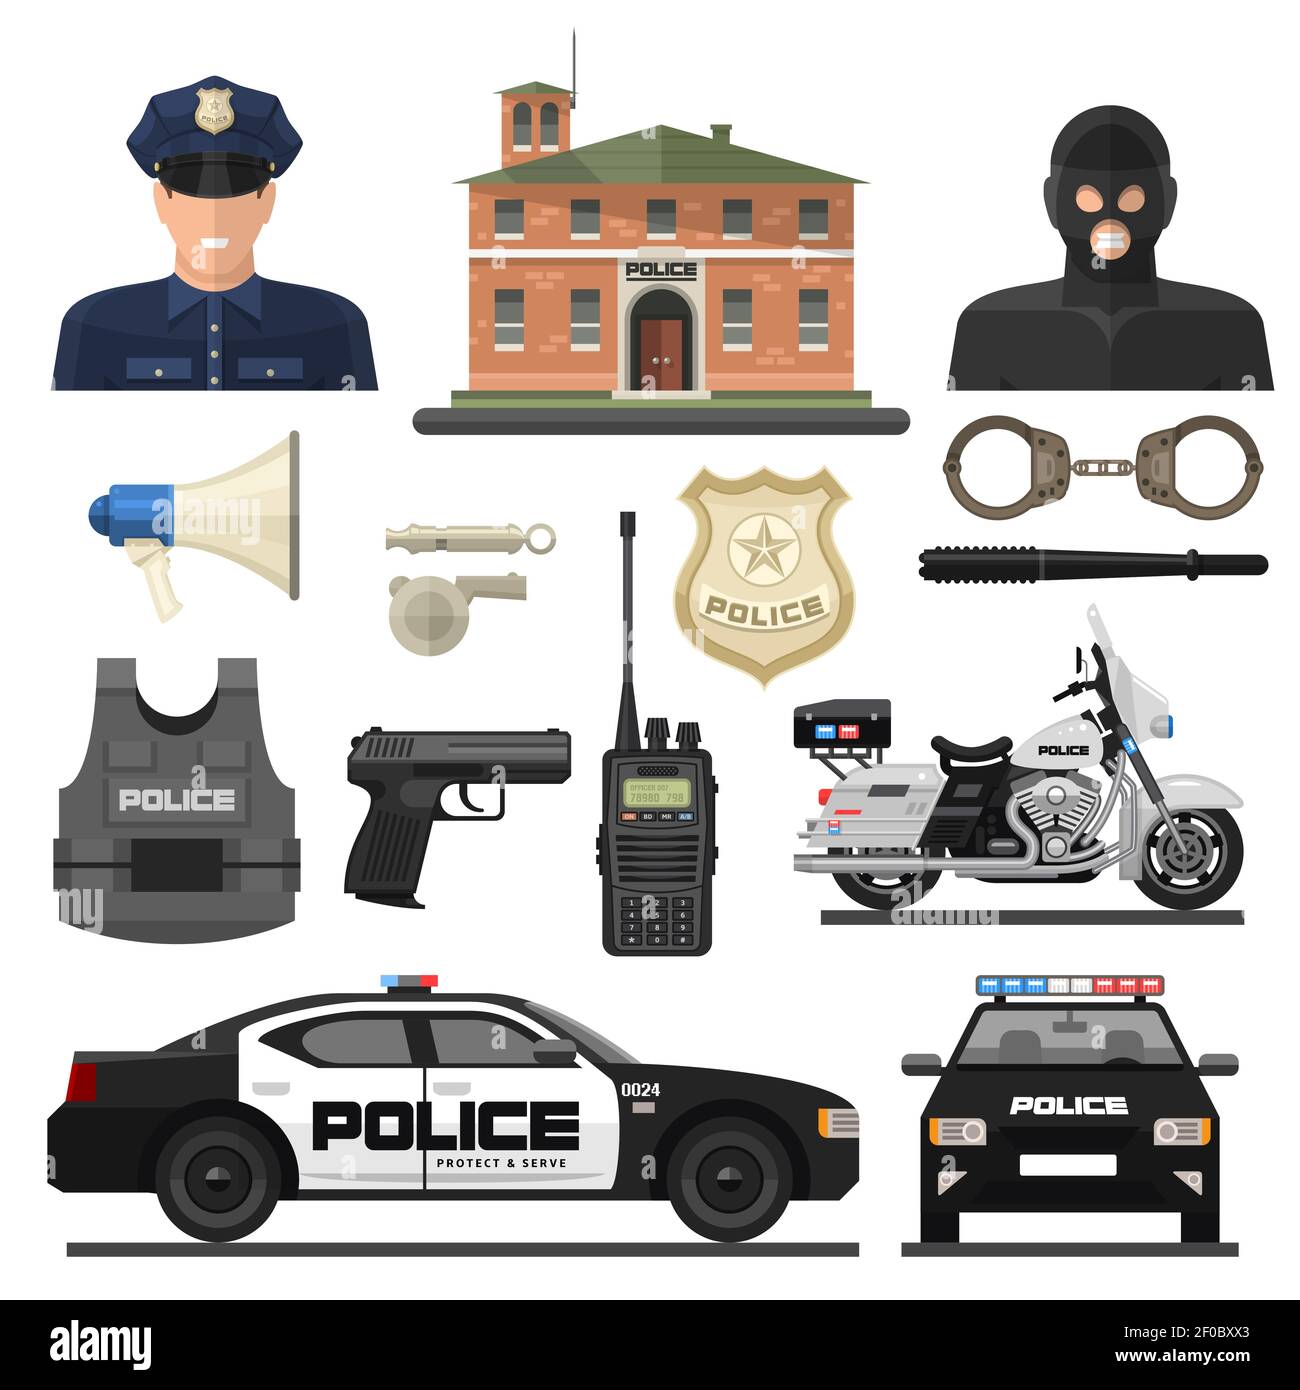 Flat isolated and colored police icon set with law enforcement officers and their means of transportation vector illustration Stock Vector